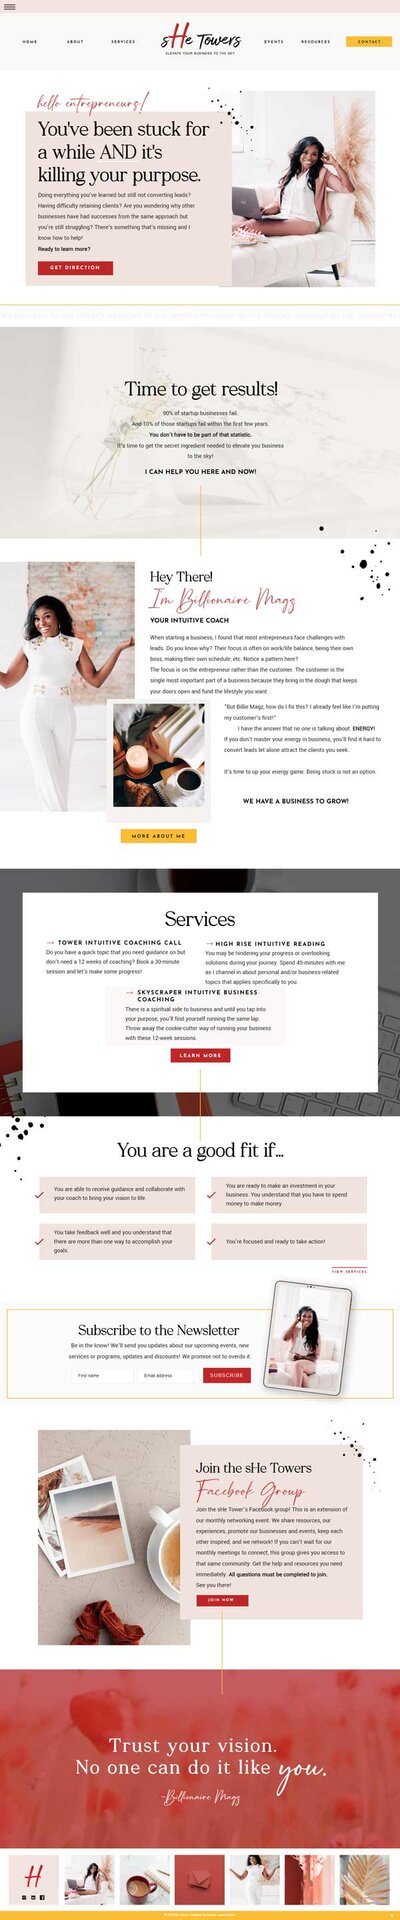 Experience the essence of Magda's business coach website homepage on a laptop screen. Meticulously designed by a Showit Web Design professional, this layout ensures a seamless browsing experience for visitors seeking transformation.